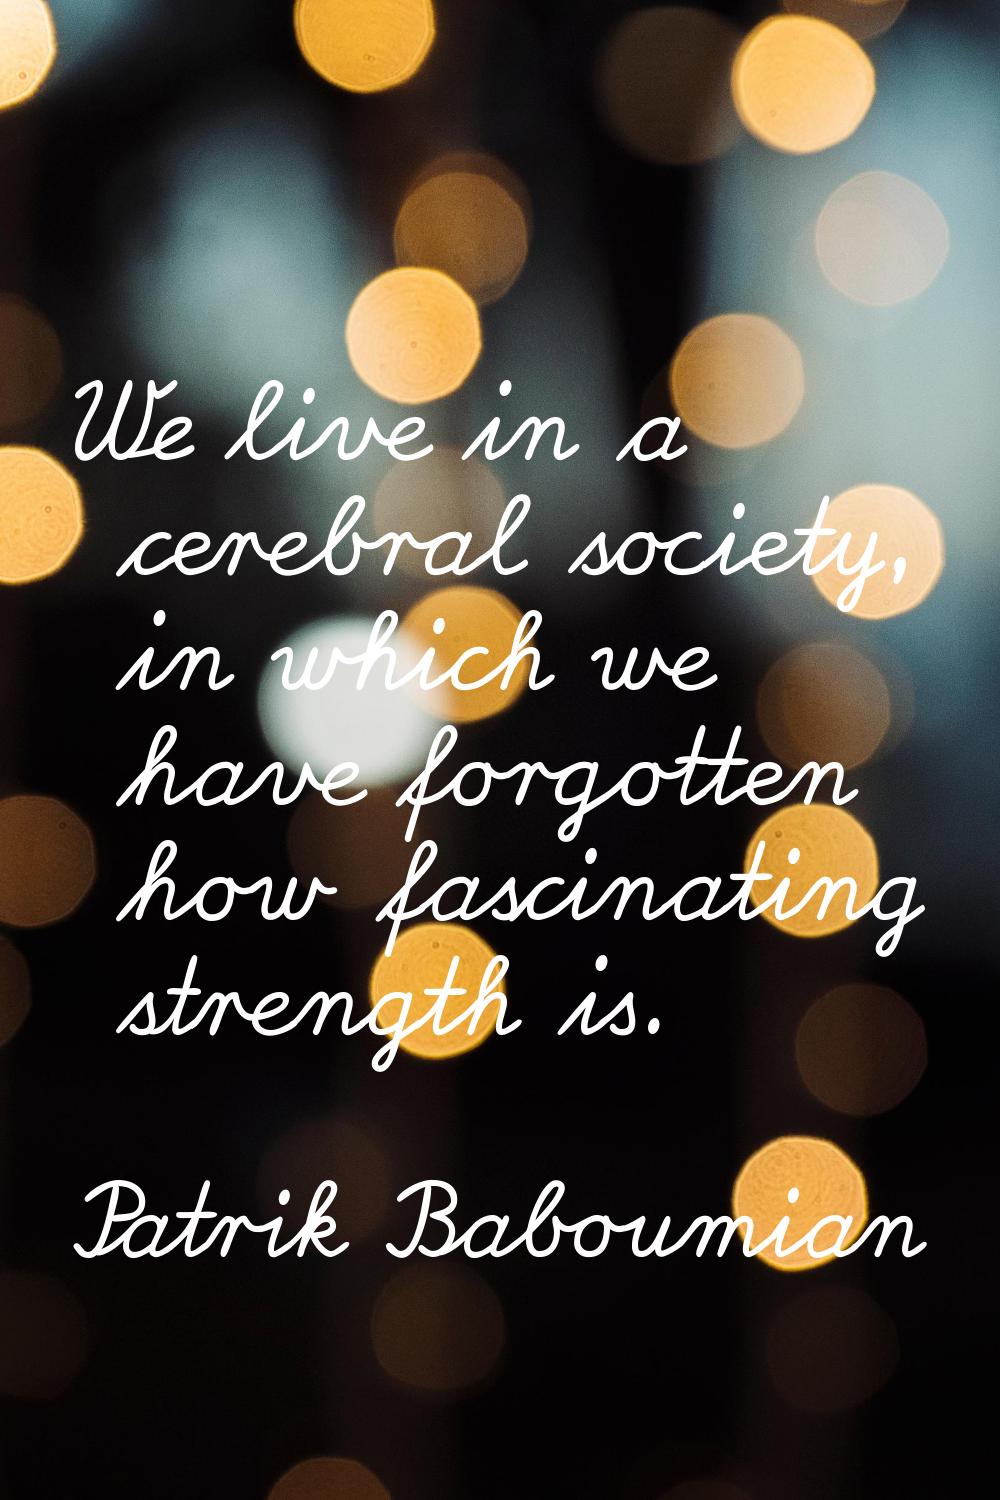 We live in a cerebral society, in which we have forgotten how fascinating strength is.